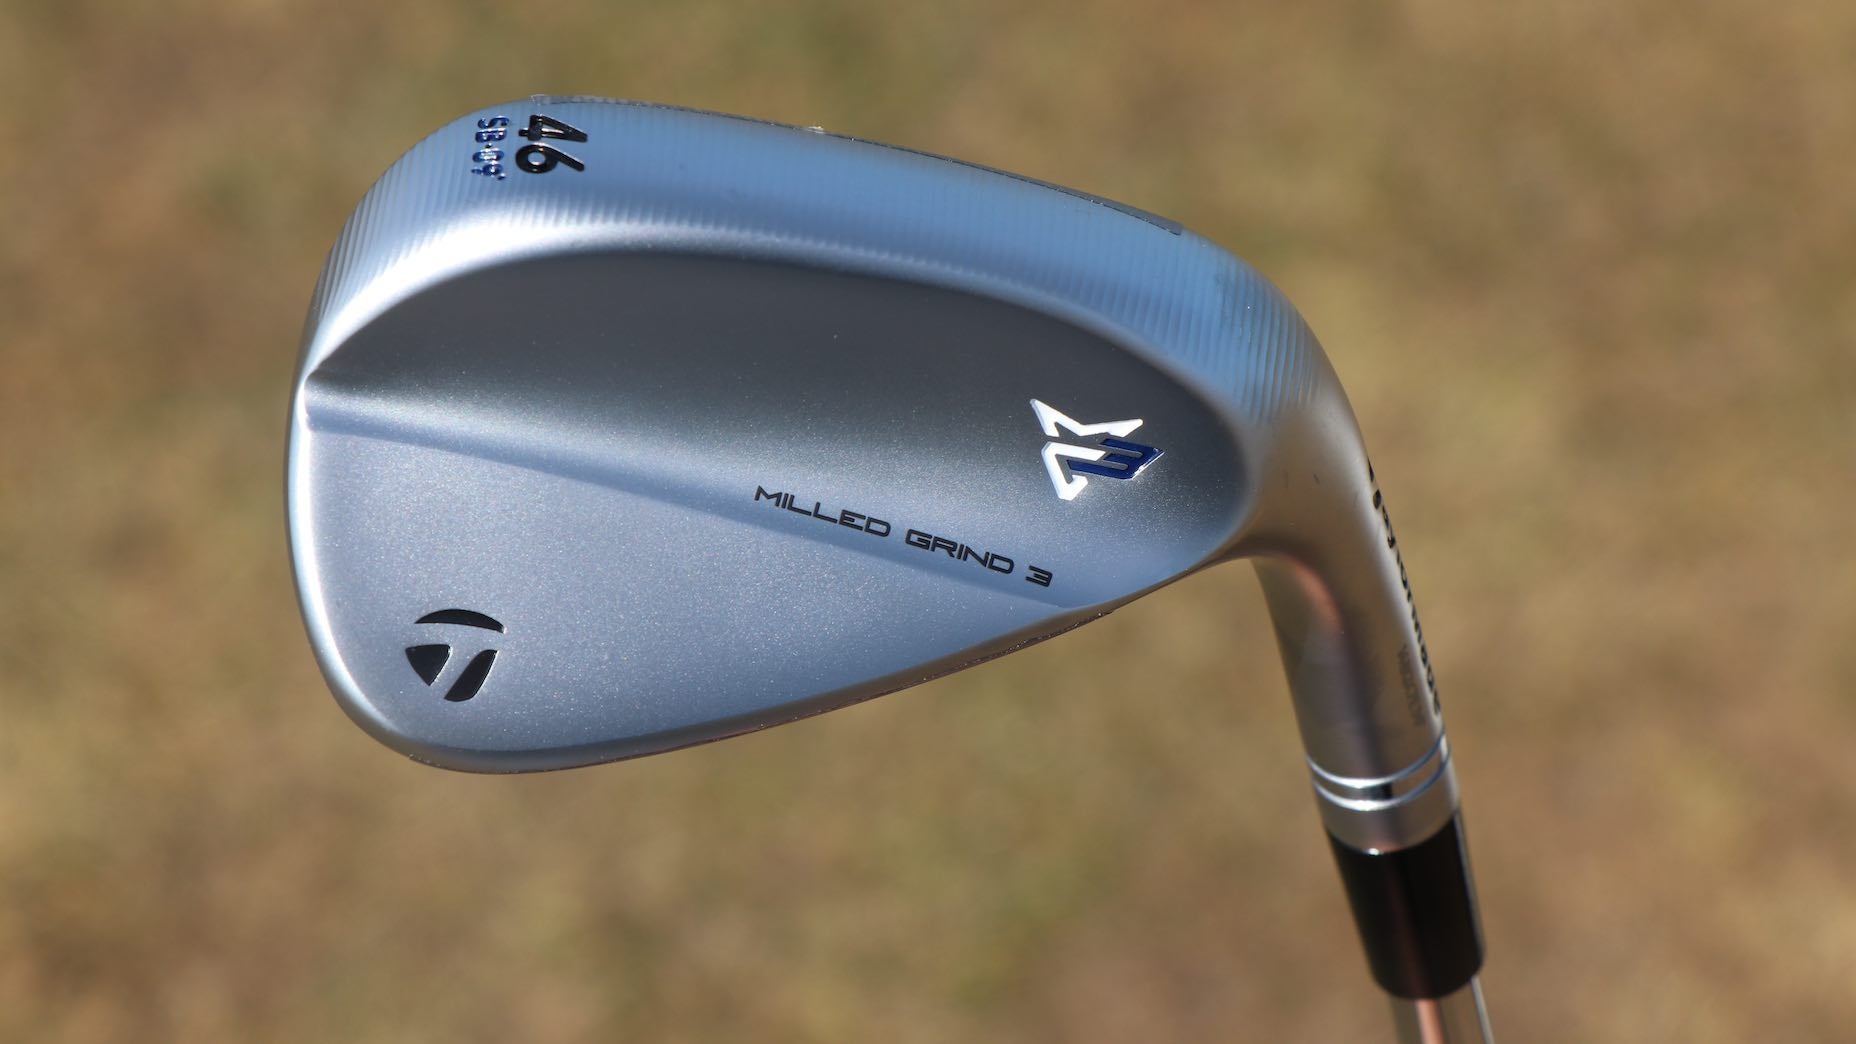 TaylorMade's MG3 wedge is a do-it-all scoring tool: First Look